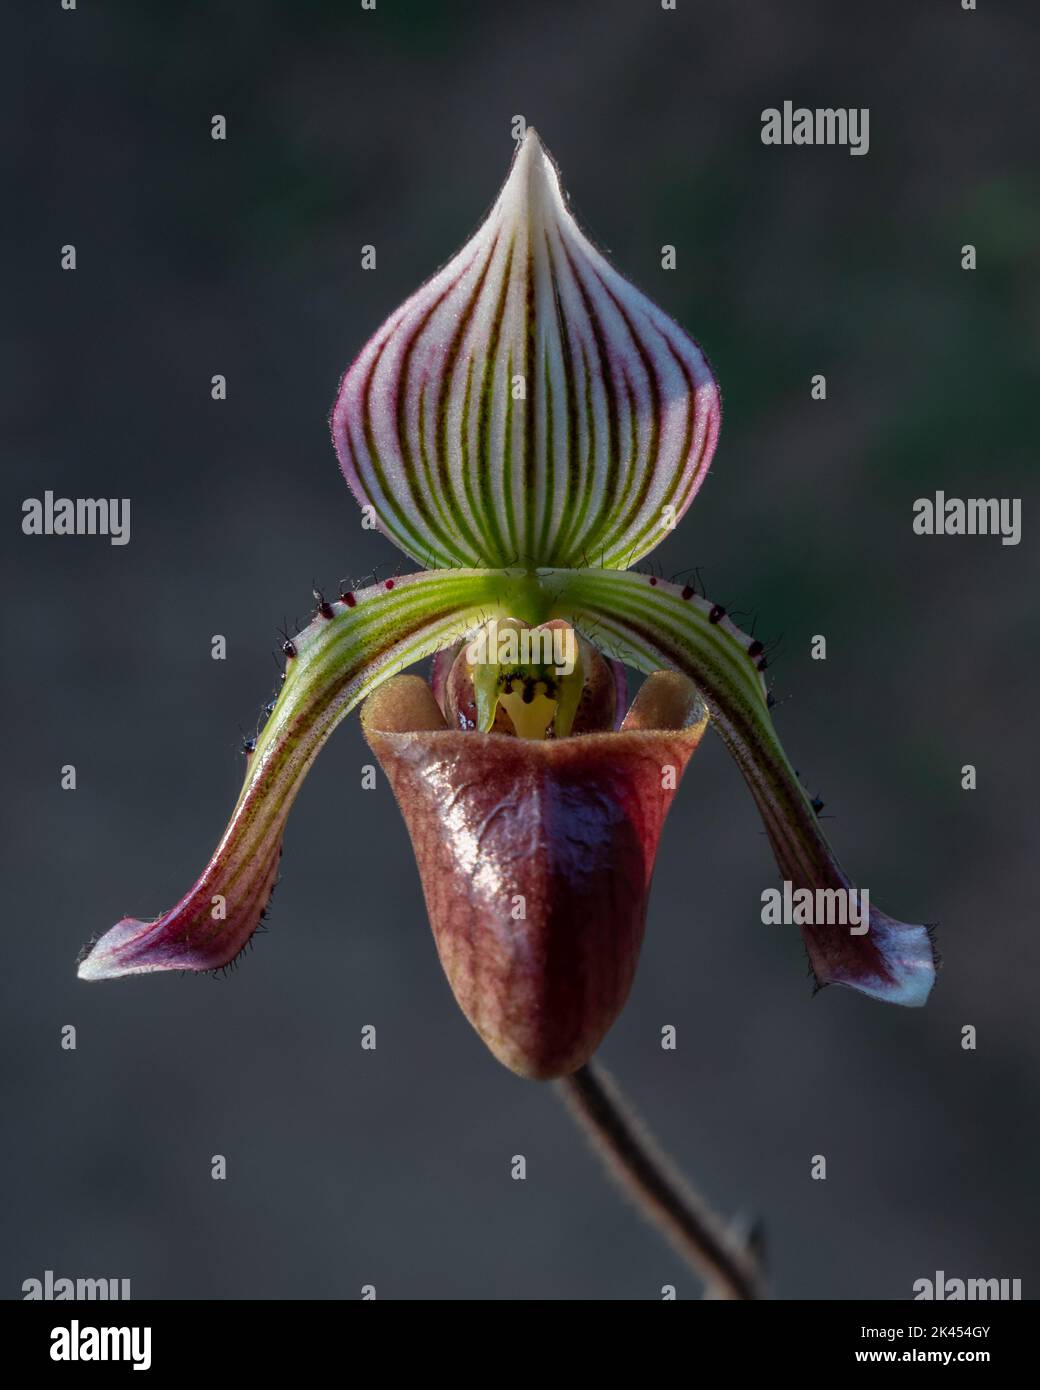 Closeup front view of beautiful purple, white and green lady slipper orchid flower paphiopedilum fowliei species isolated on natural background Stock Photo